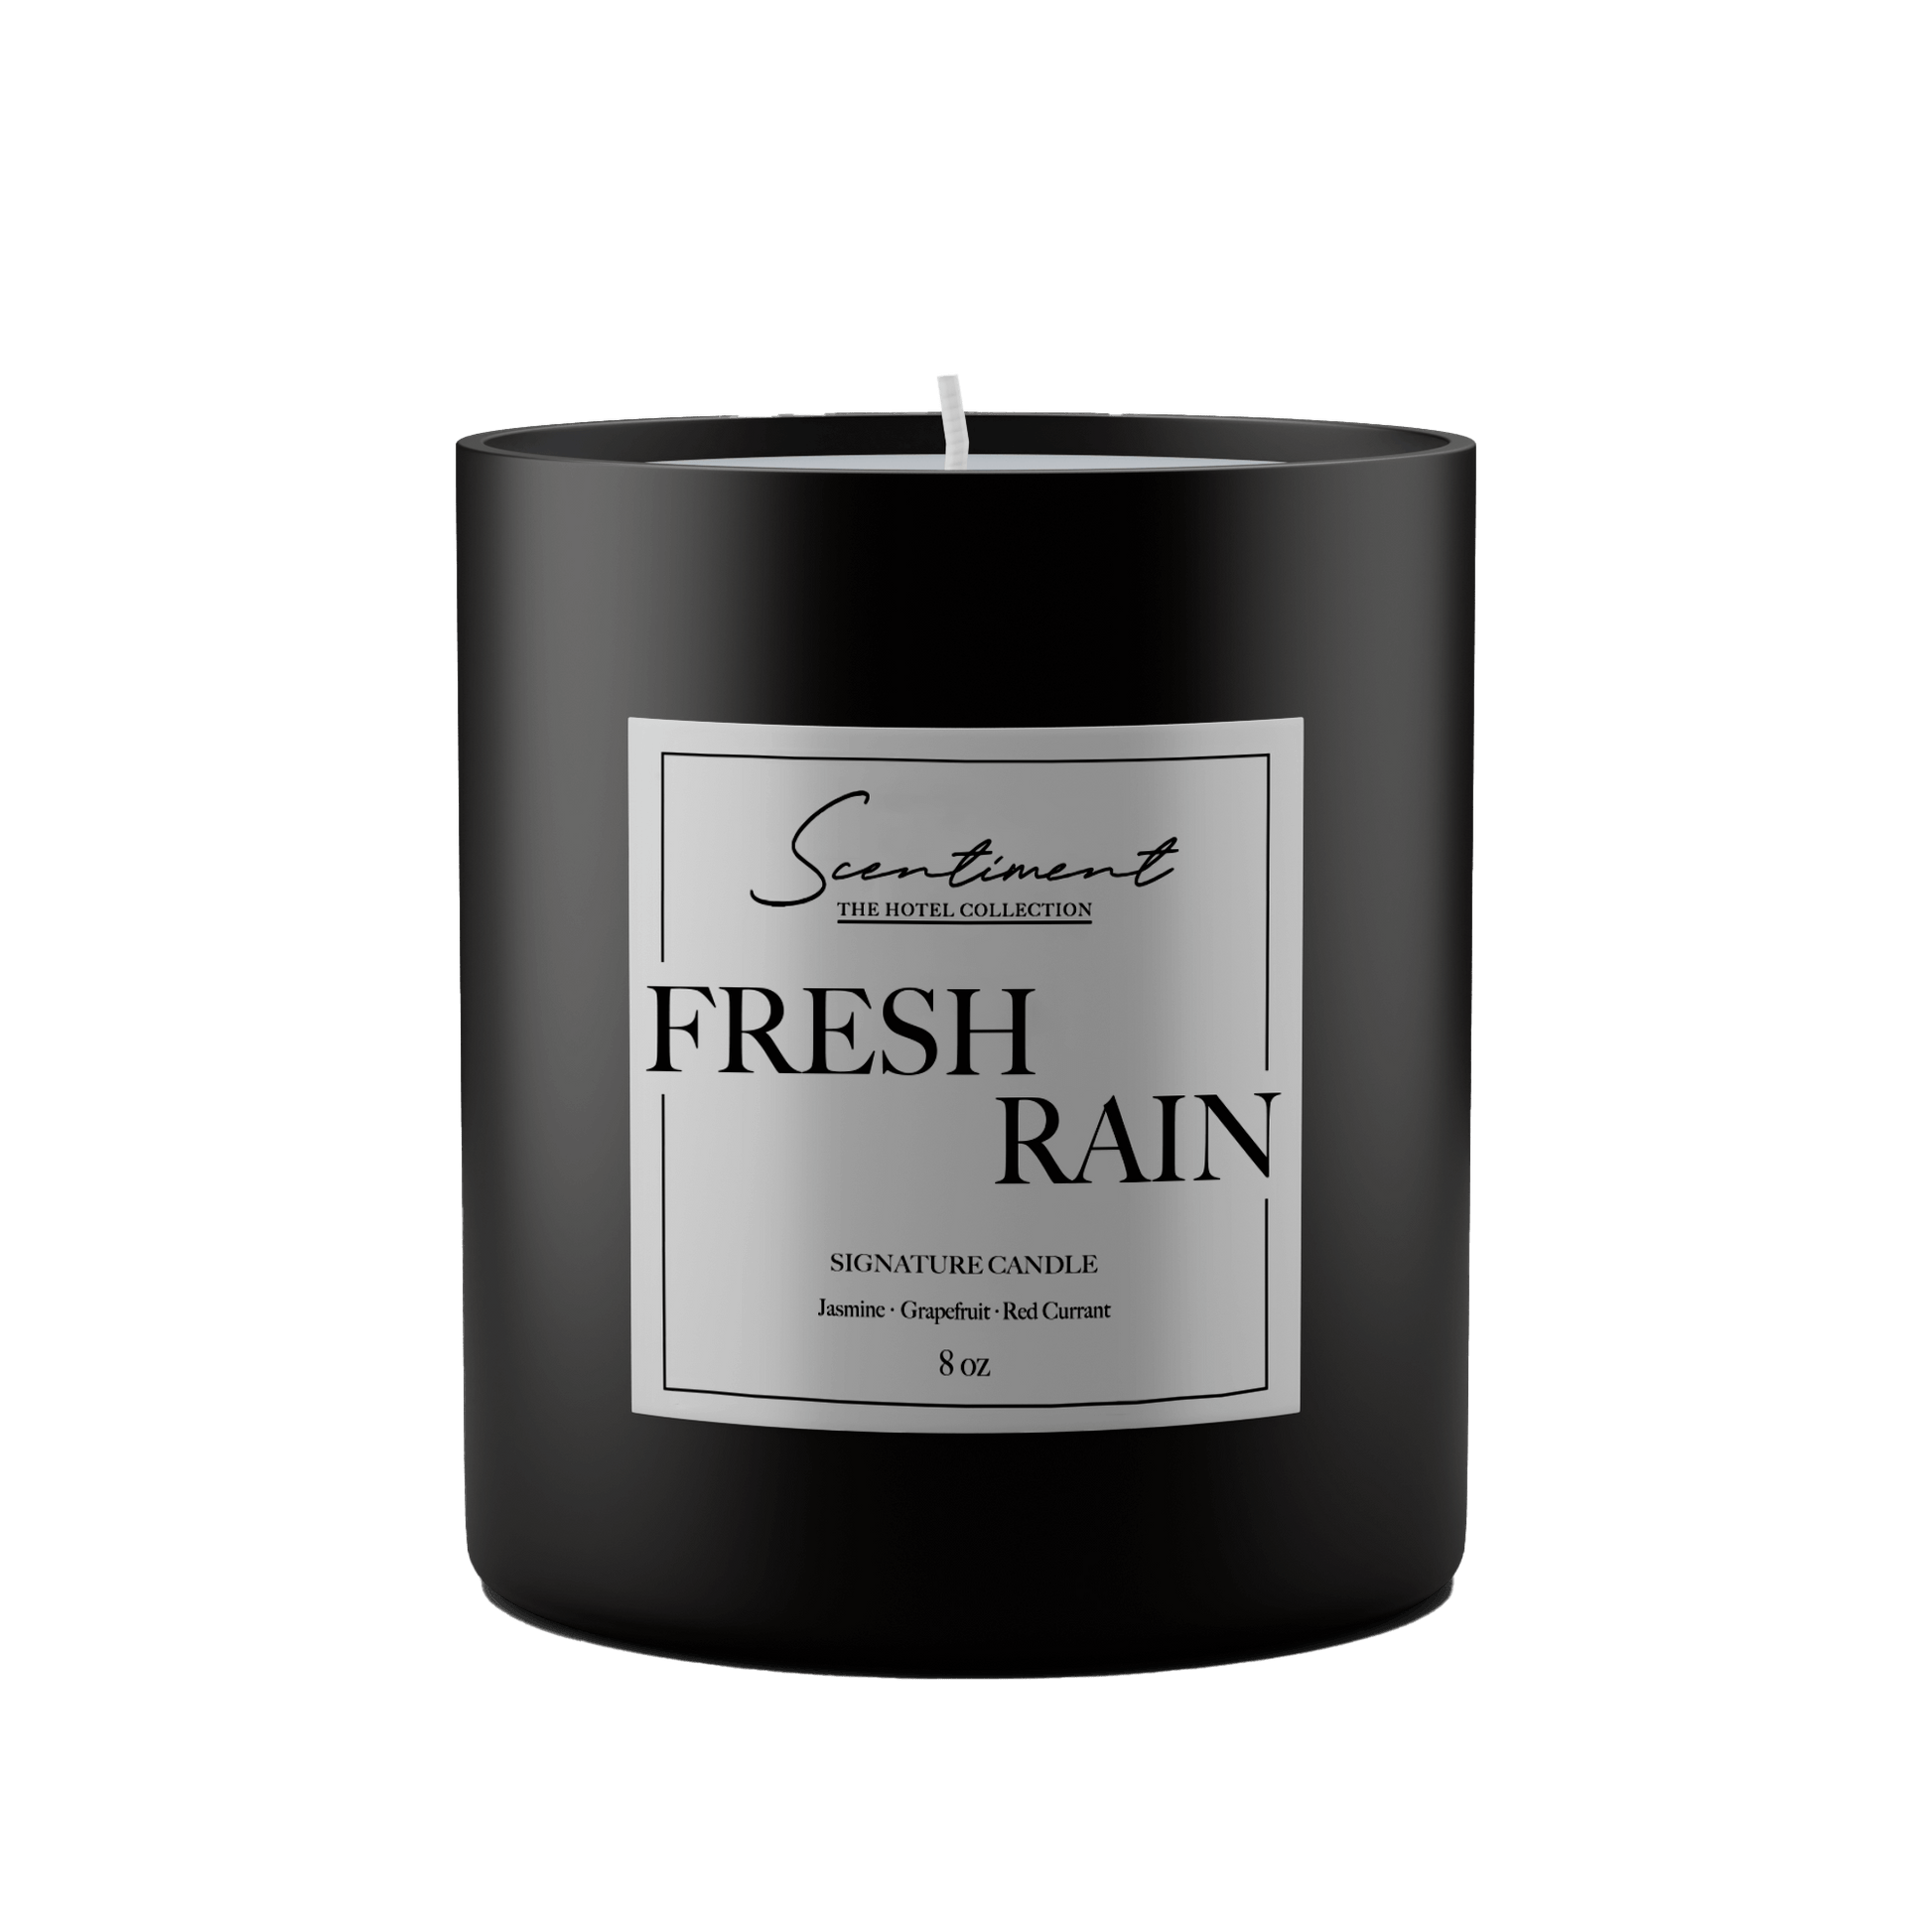 Inspired by Marriott® hotels, Fresh Rain Candle 